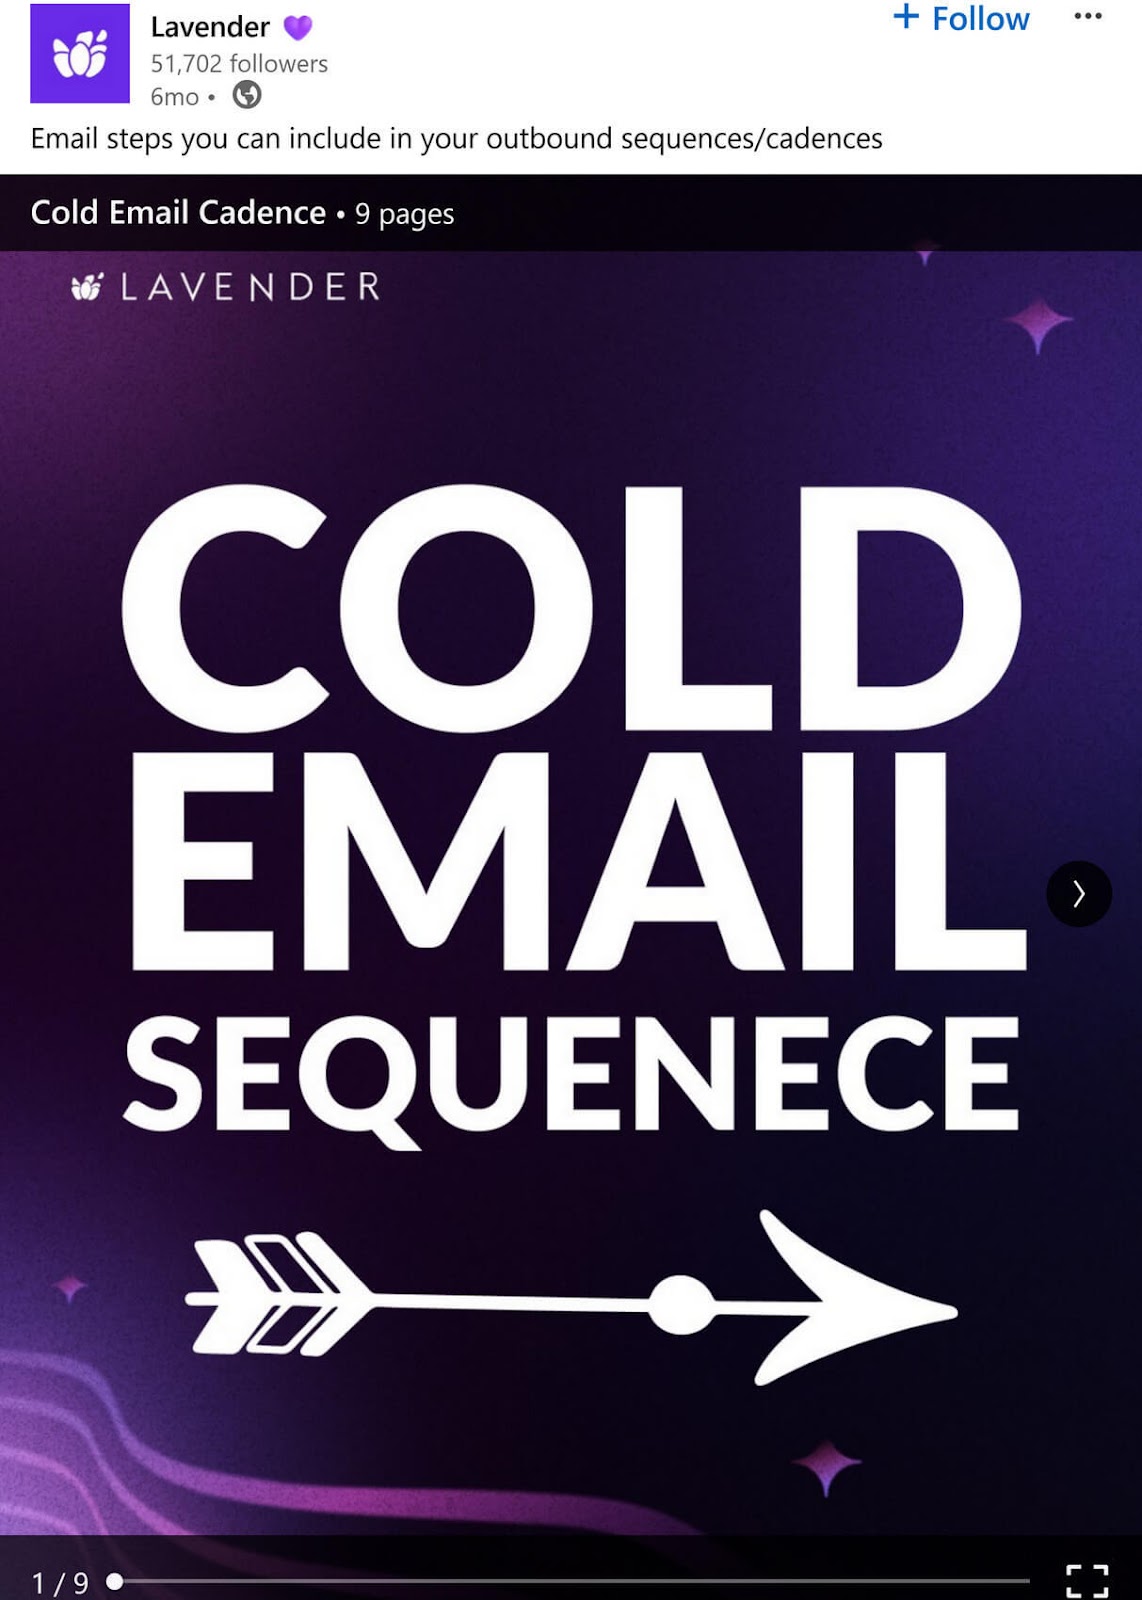 LinkedIn post featuring a graphic with the words "COLD EMAIL SEQUENCE" in large white letters on a purple background.